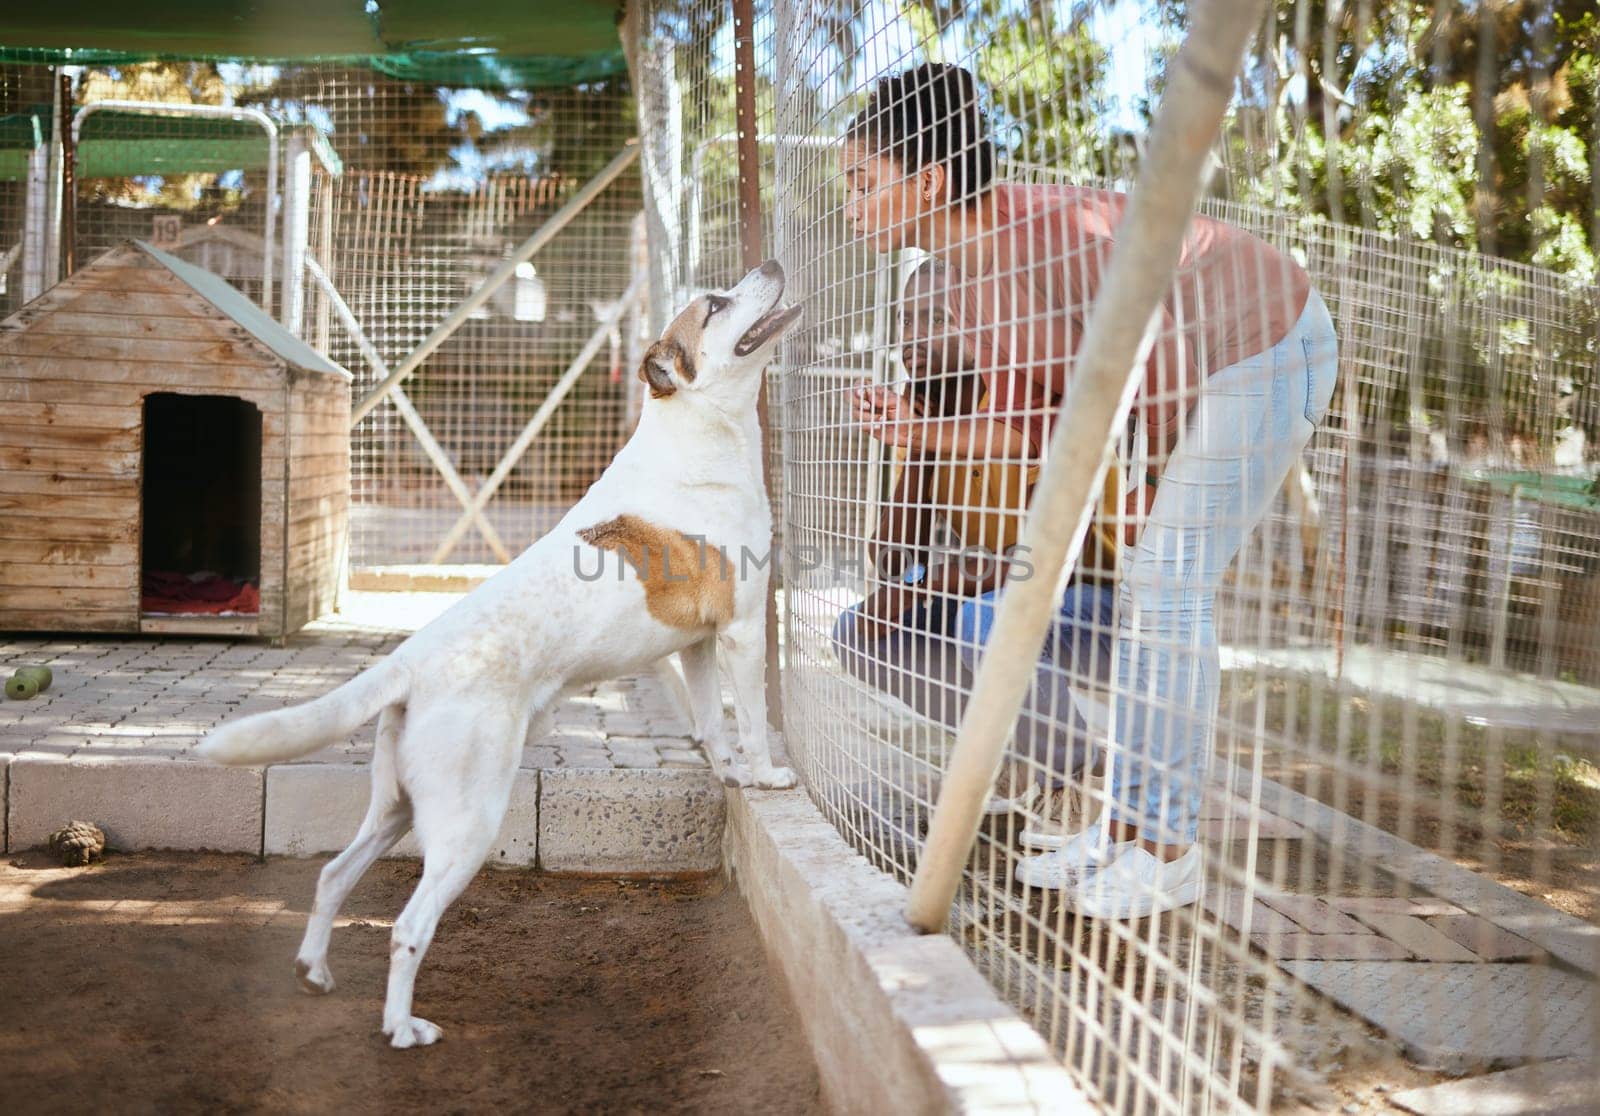 Fence, dog and adoption at animal shelter with black couple playing with animal. Empathy, foster care and man and woman bonding, enjoying time and having fun with excited pet at vet, kennel or pound